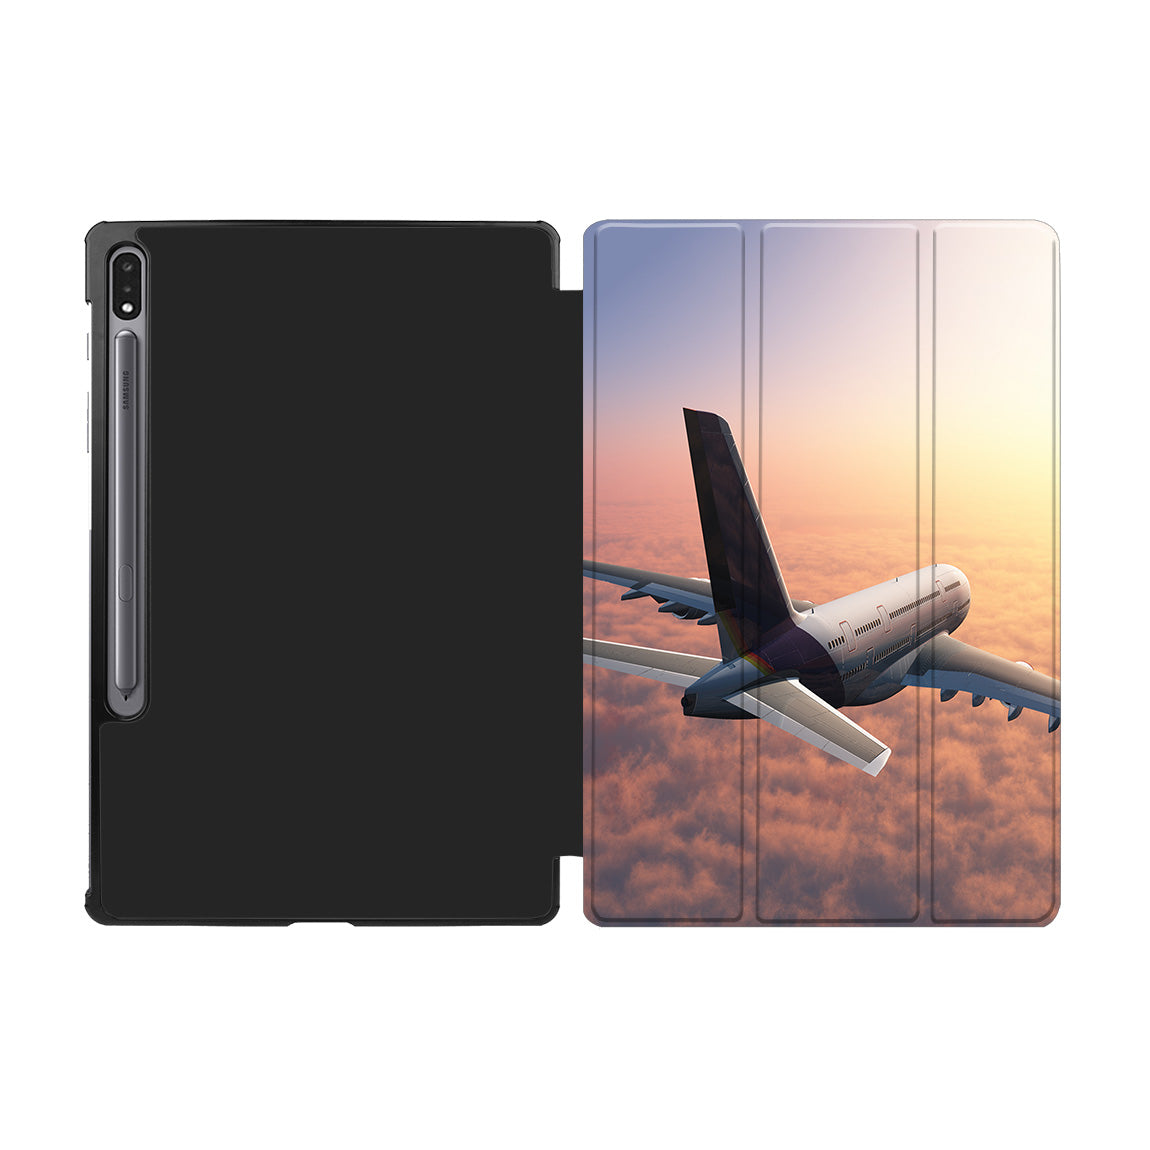 Super Cruising Airbus A380 over Clouds Designed Samsung Tablet Cases